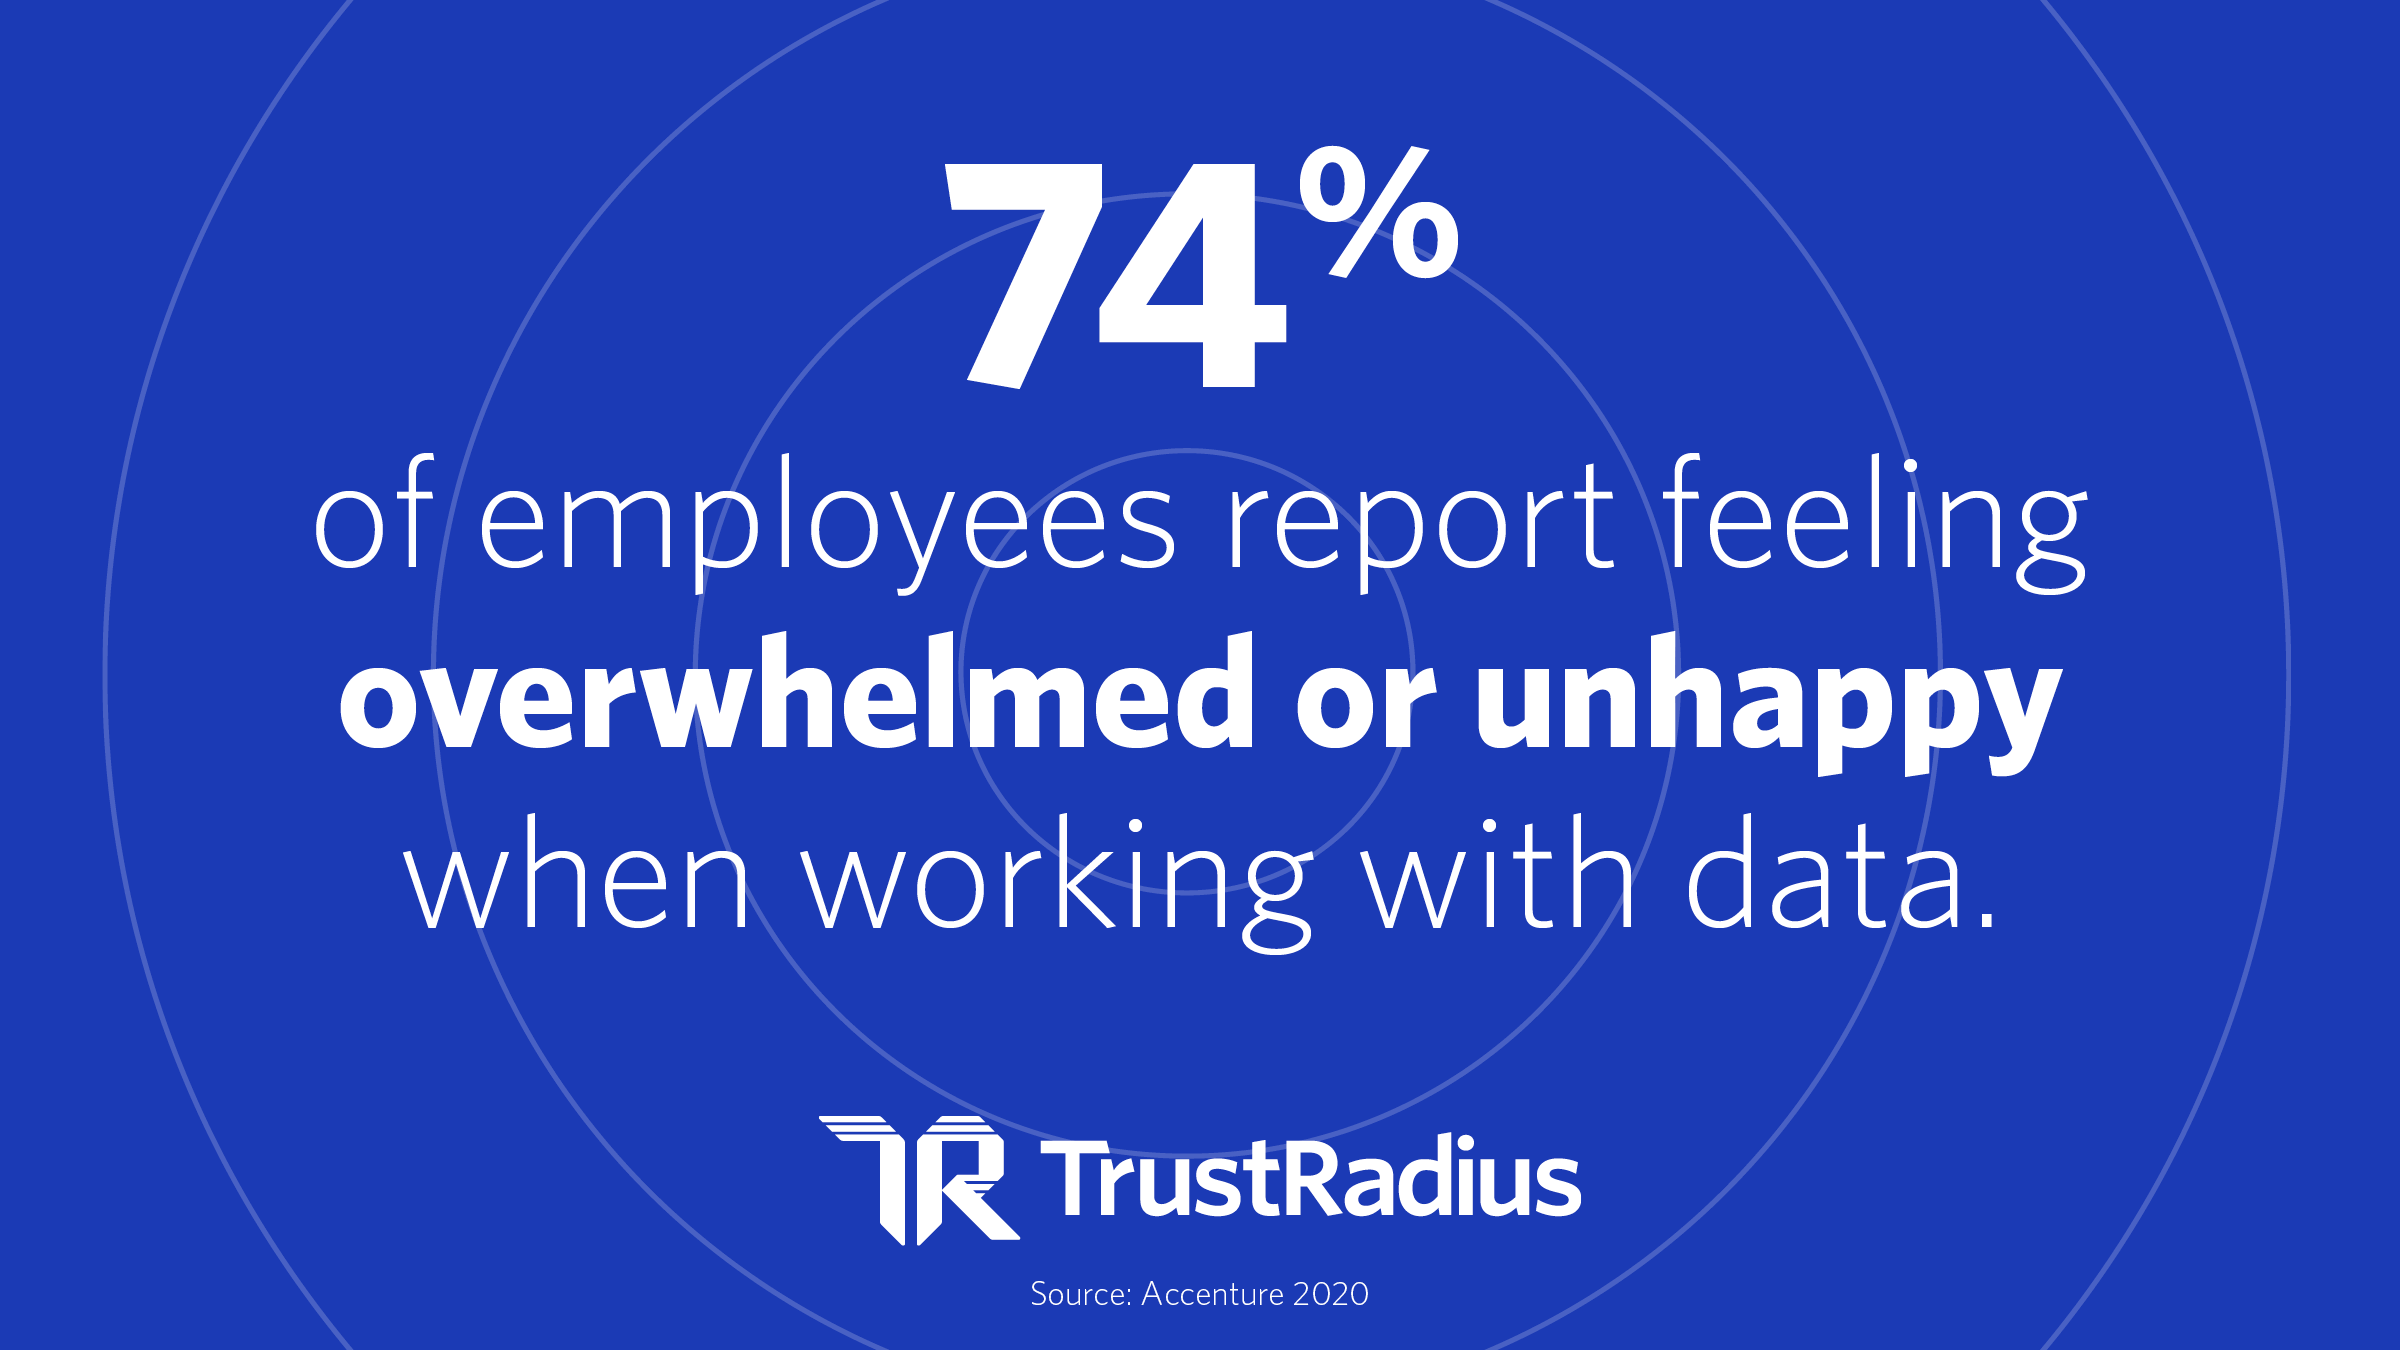 74% of employees report feeling overwhelemed or unhappy when working with data